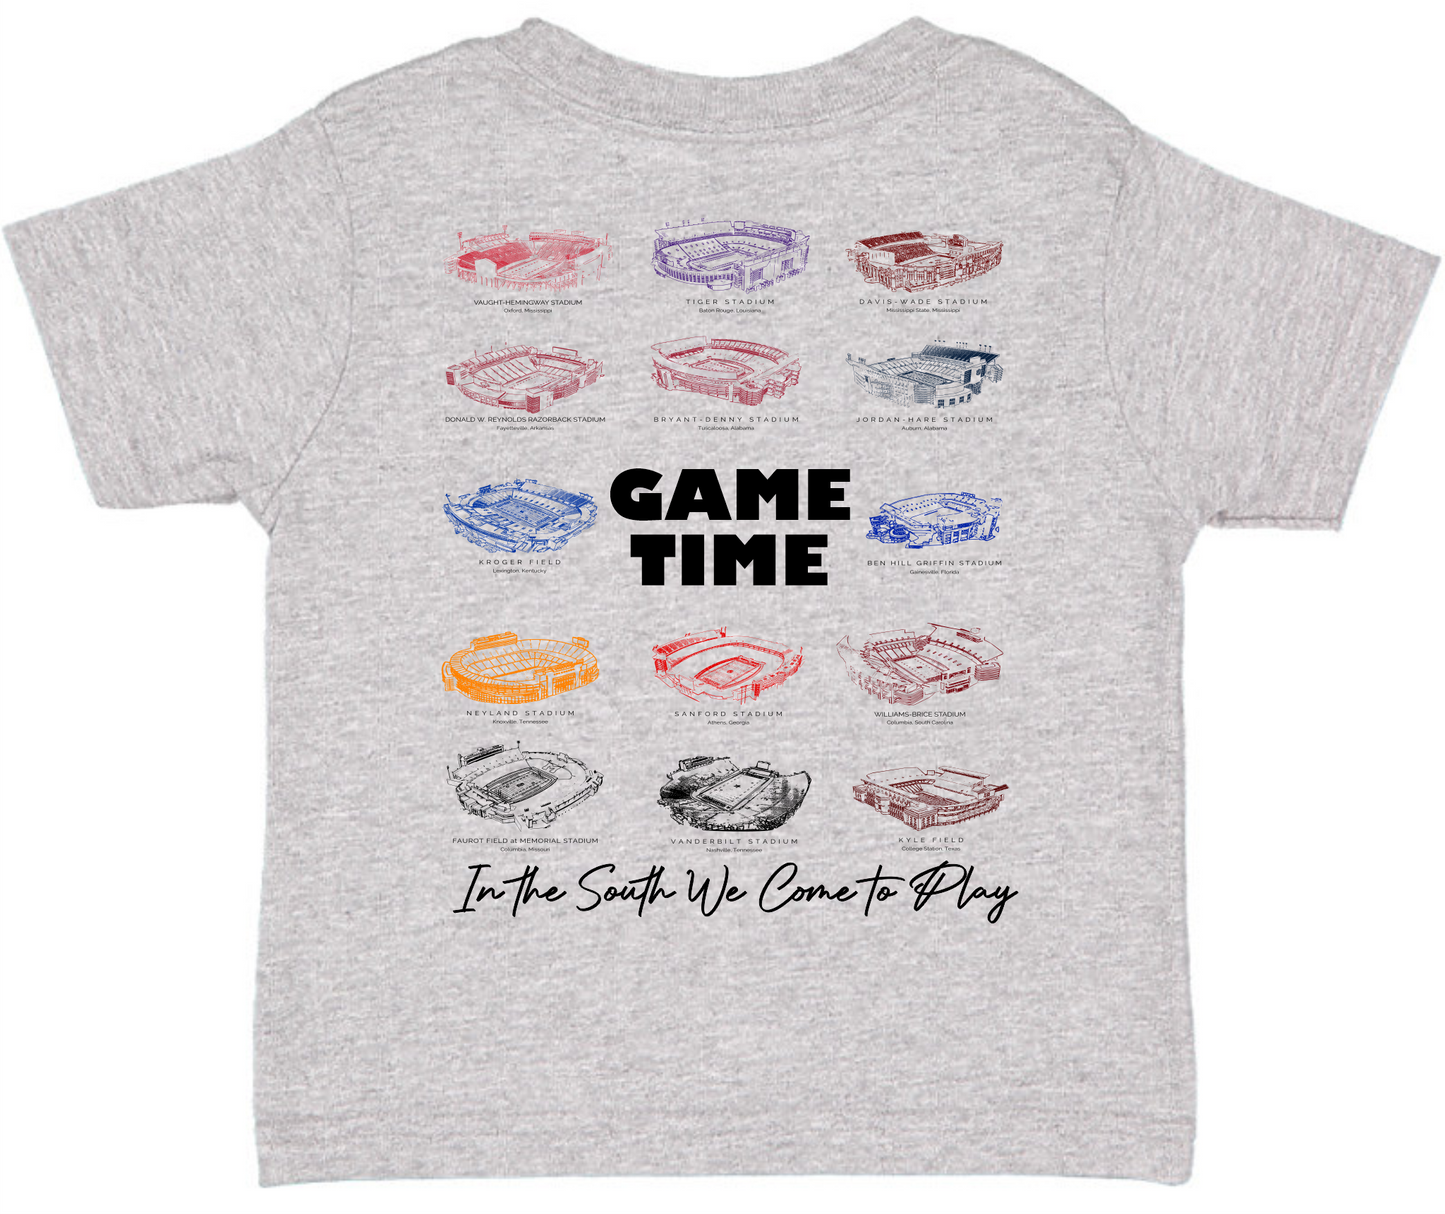 Game time toddler and youth tee